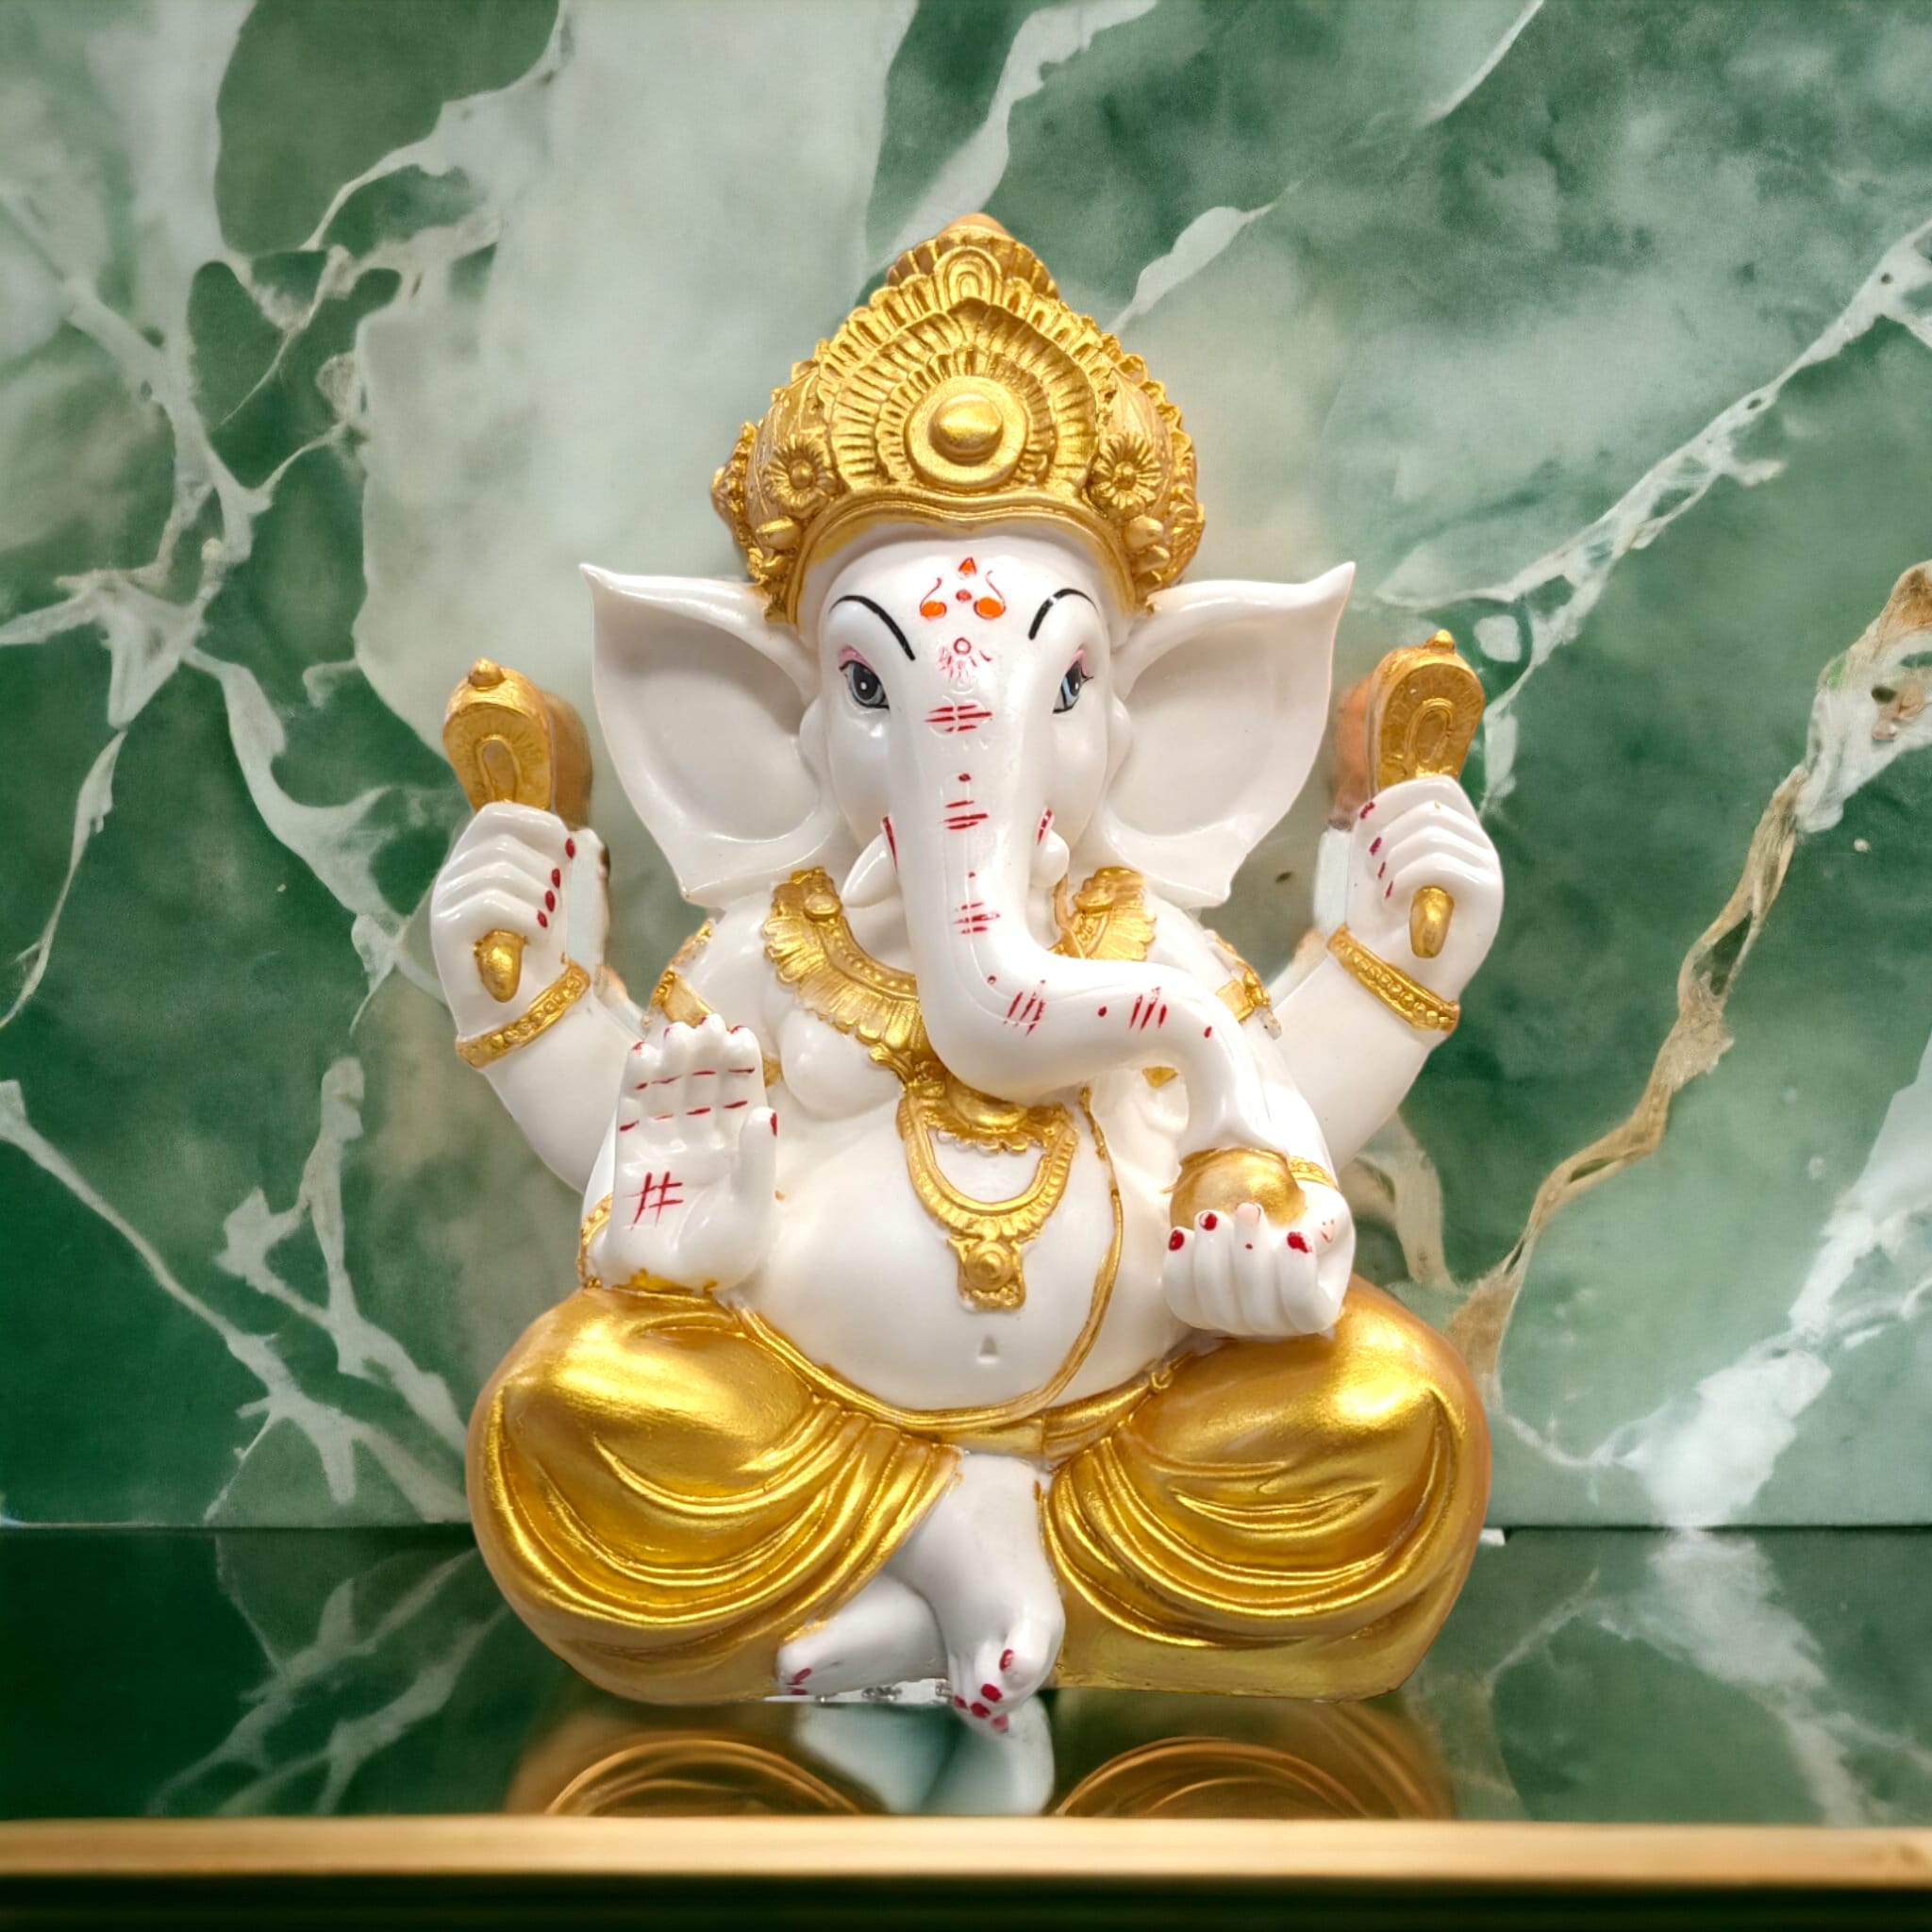 Image of Large sized Ganesh Idol with golden dhoti placed on a marble top